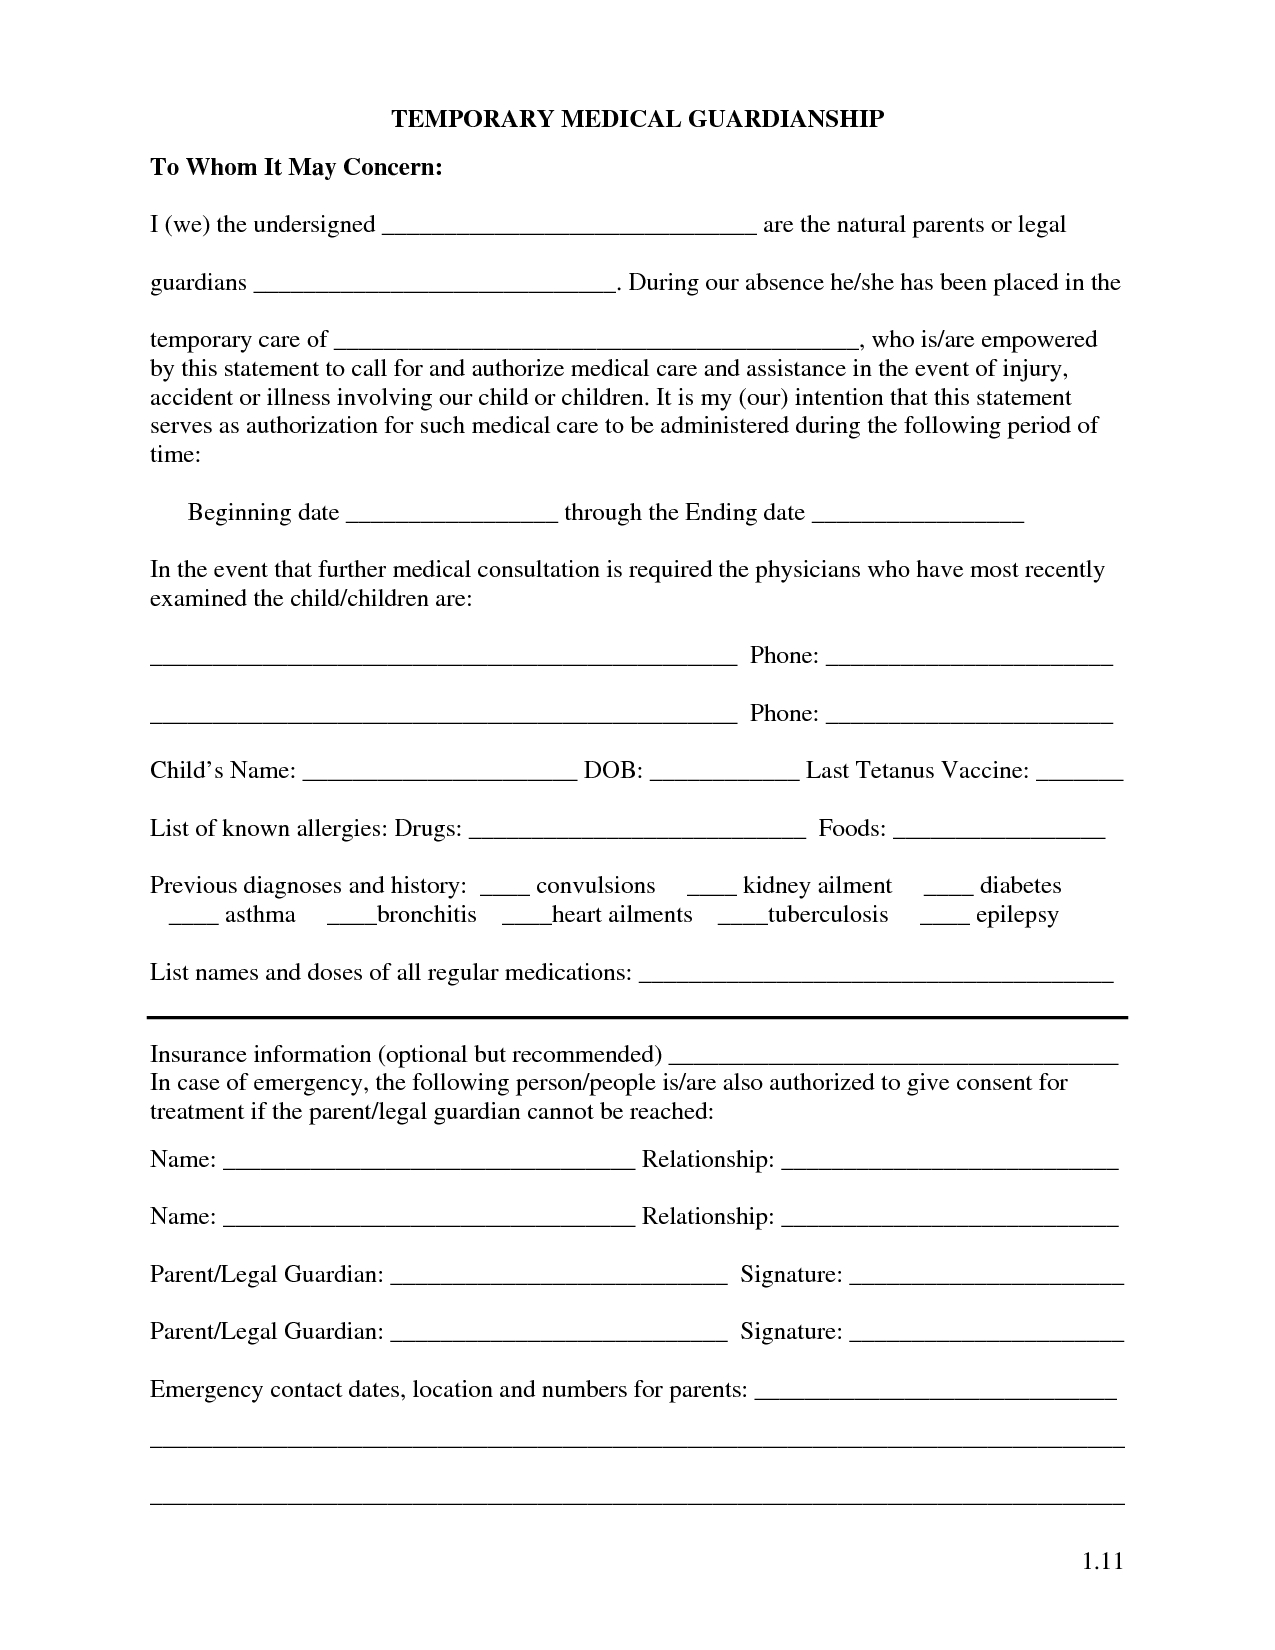 Free Printable Temporary Guardianship Forms | Forms | Child Custody - Free Printable Legal Documents Forms